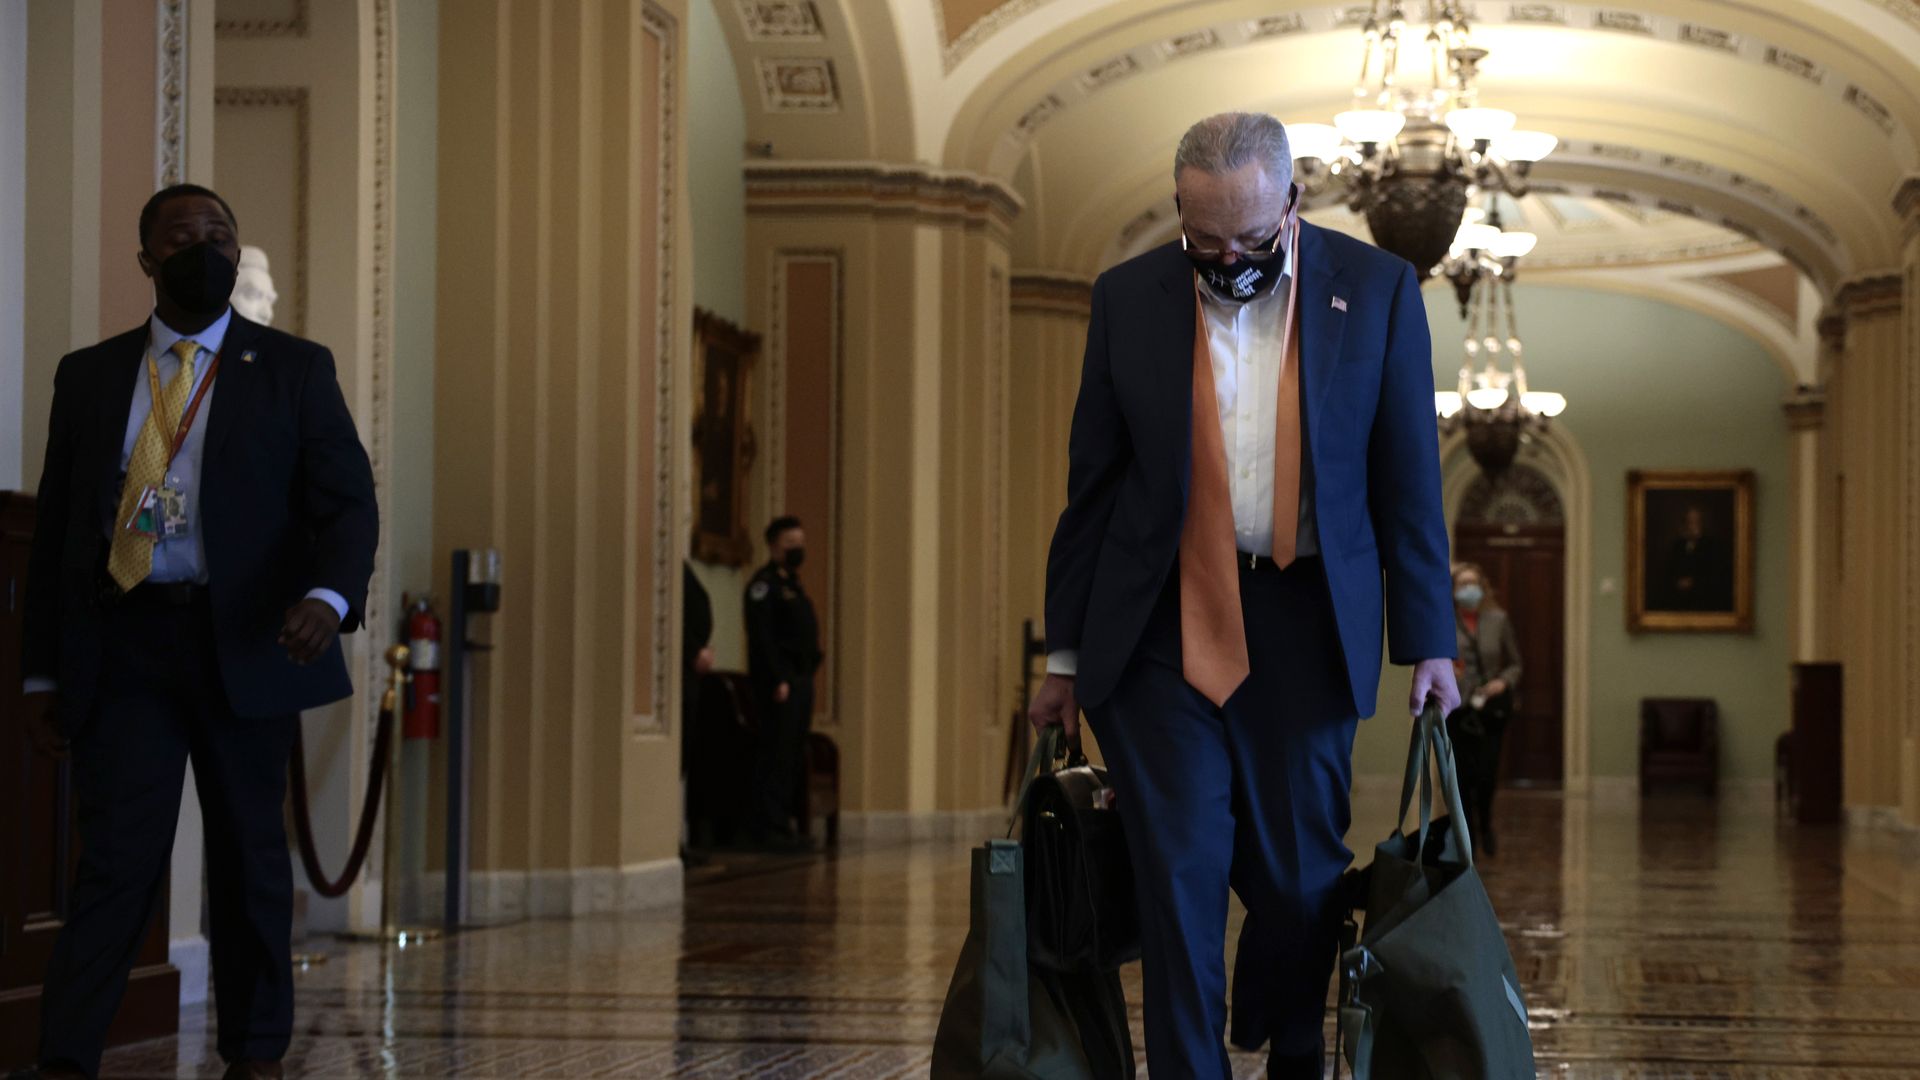 Senate Majority Leader Chuck Schumer is seen walking back into the Capitol at the start of a new week.